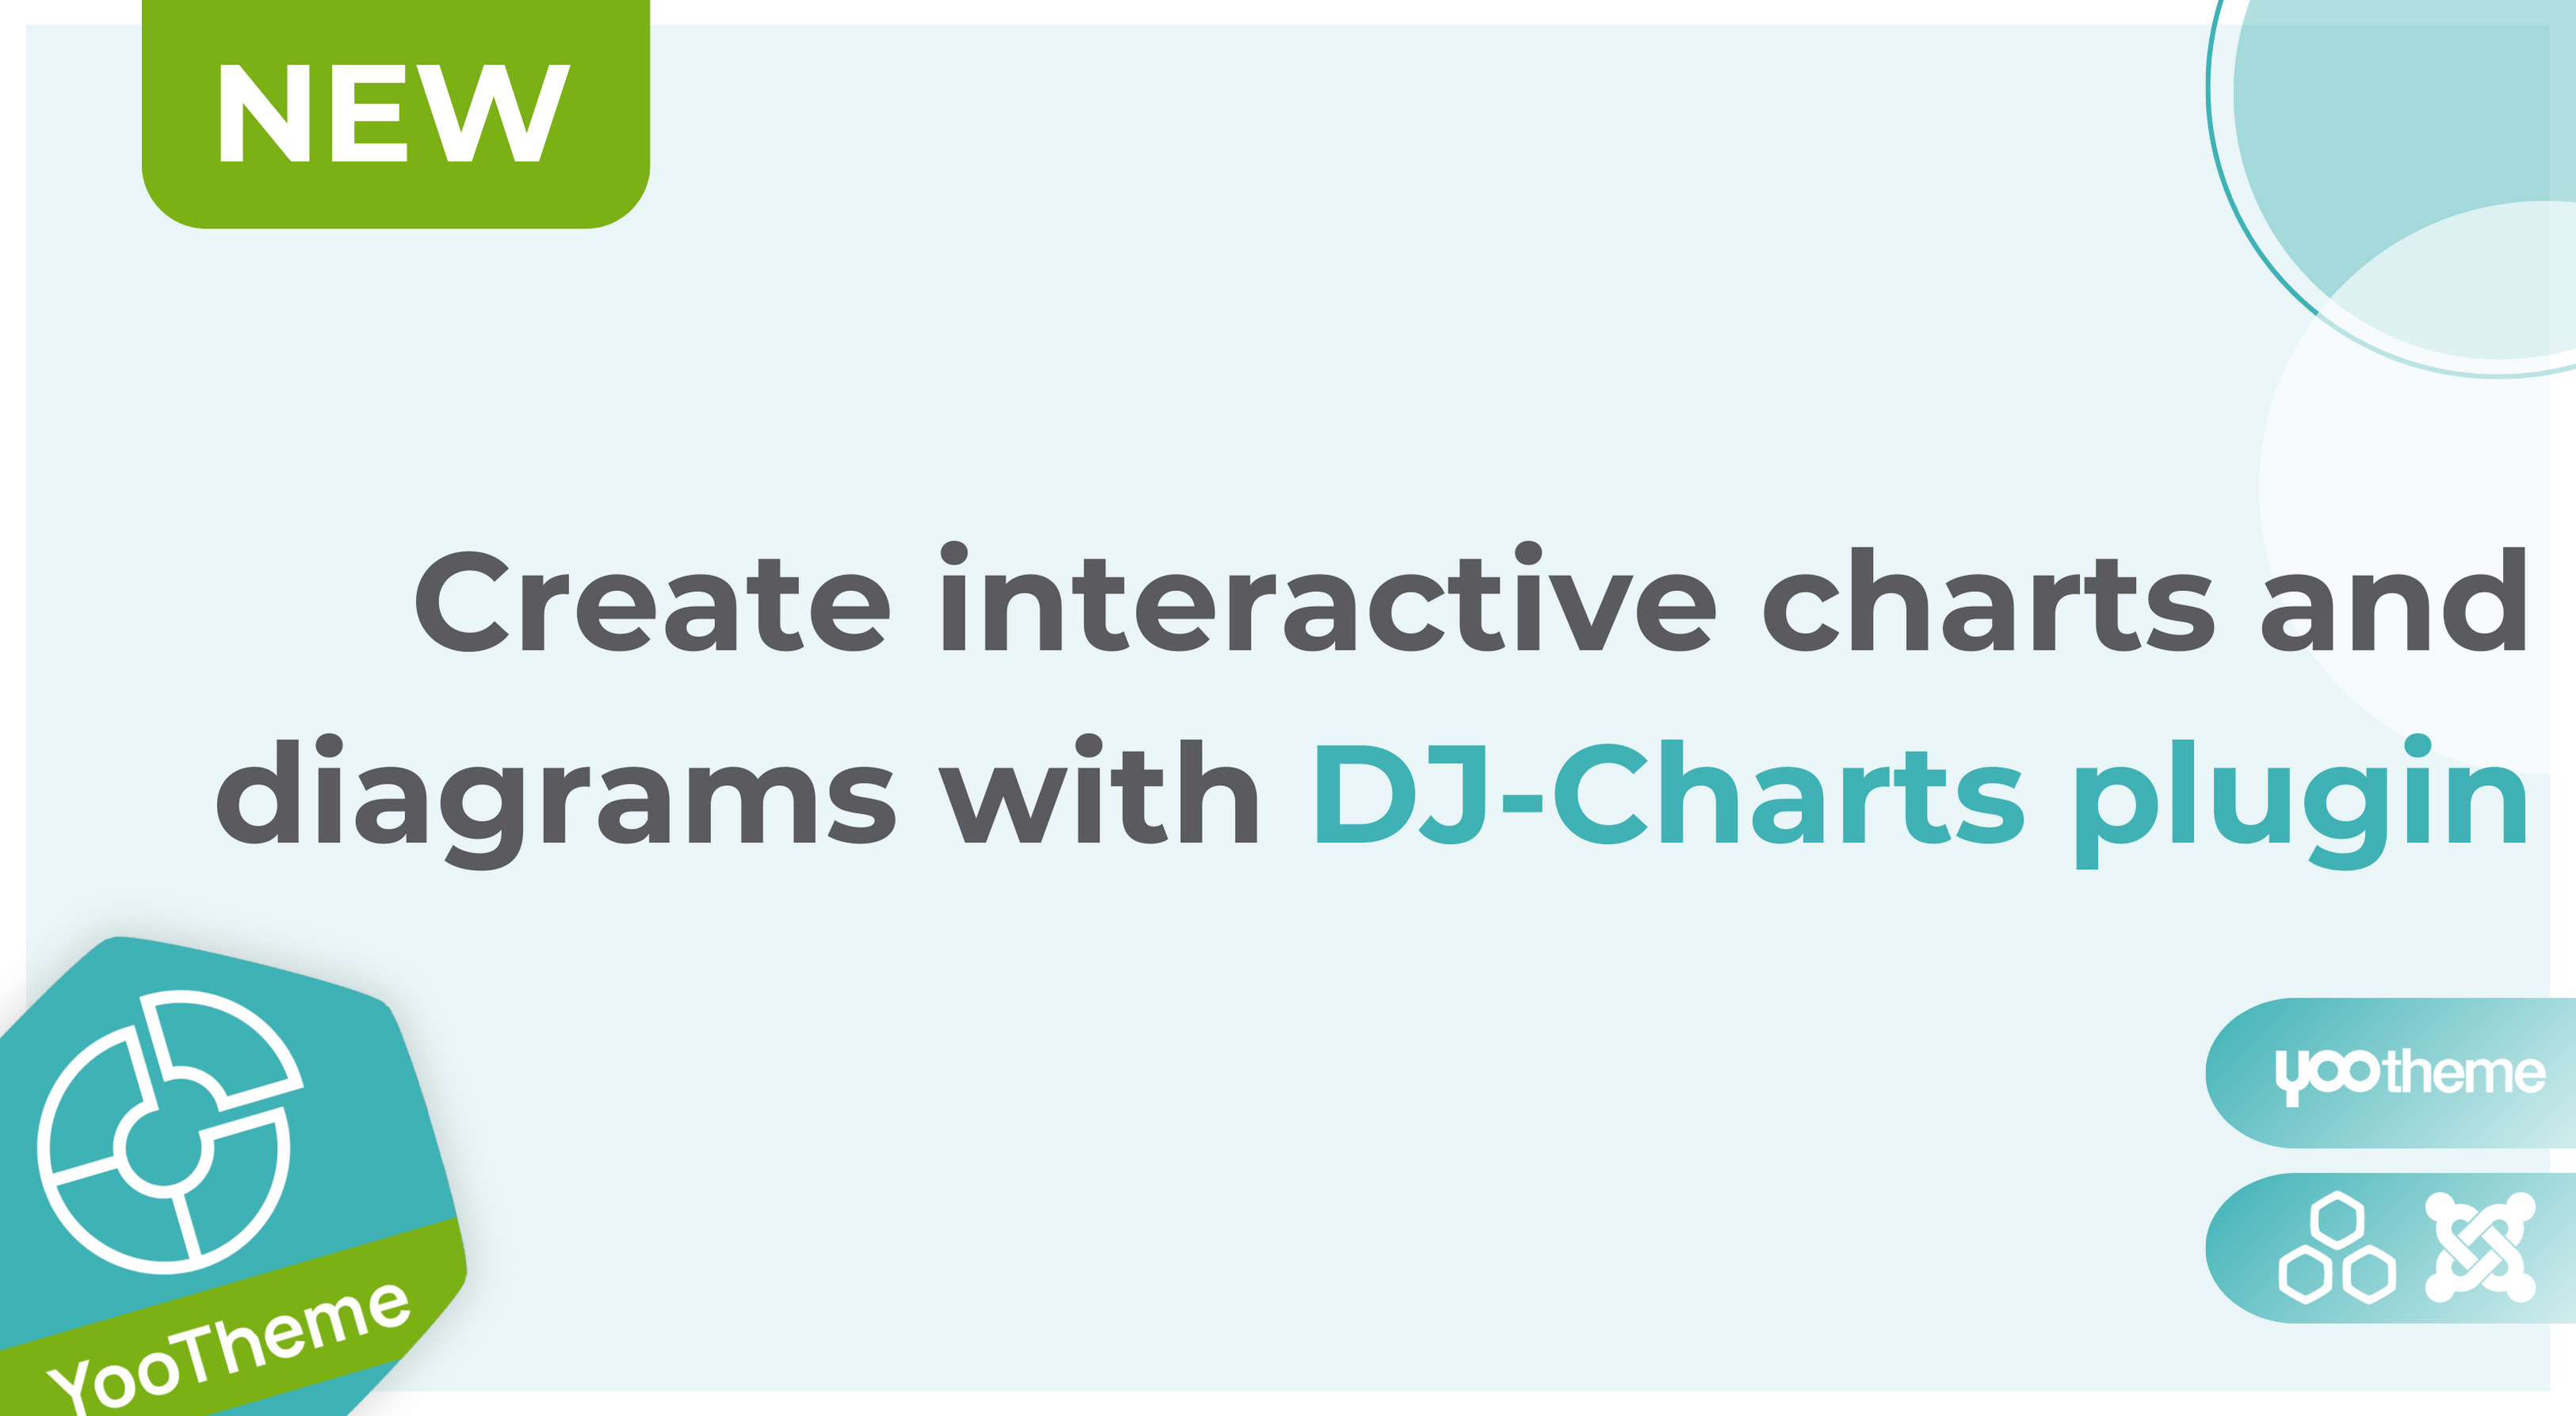 New plugin release! Use DJ-Charts for creating interactive charts and diagrams in Joomla/YOOtheme Pro